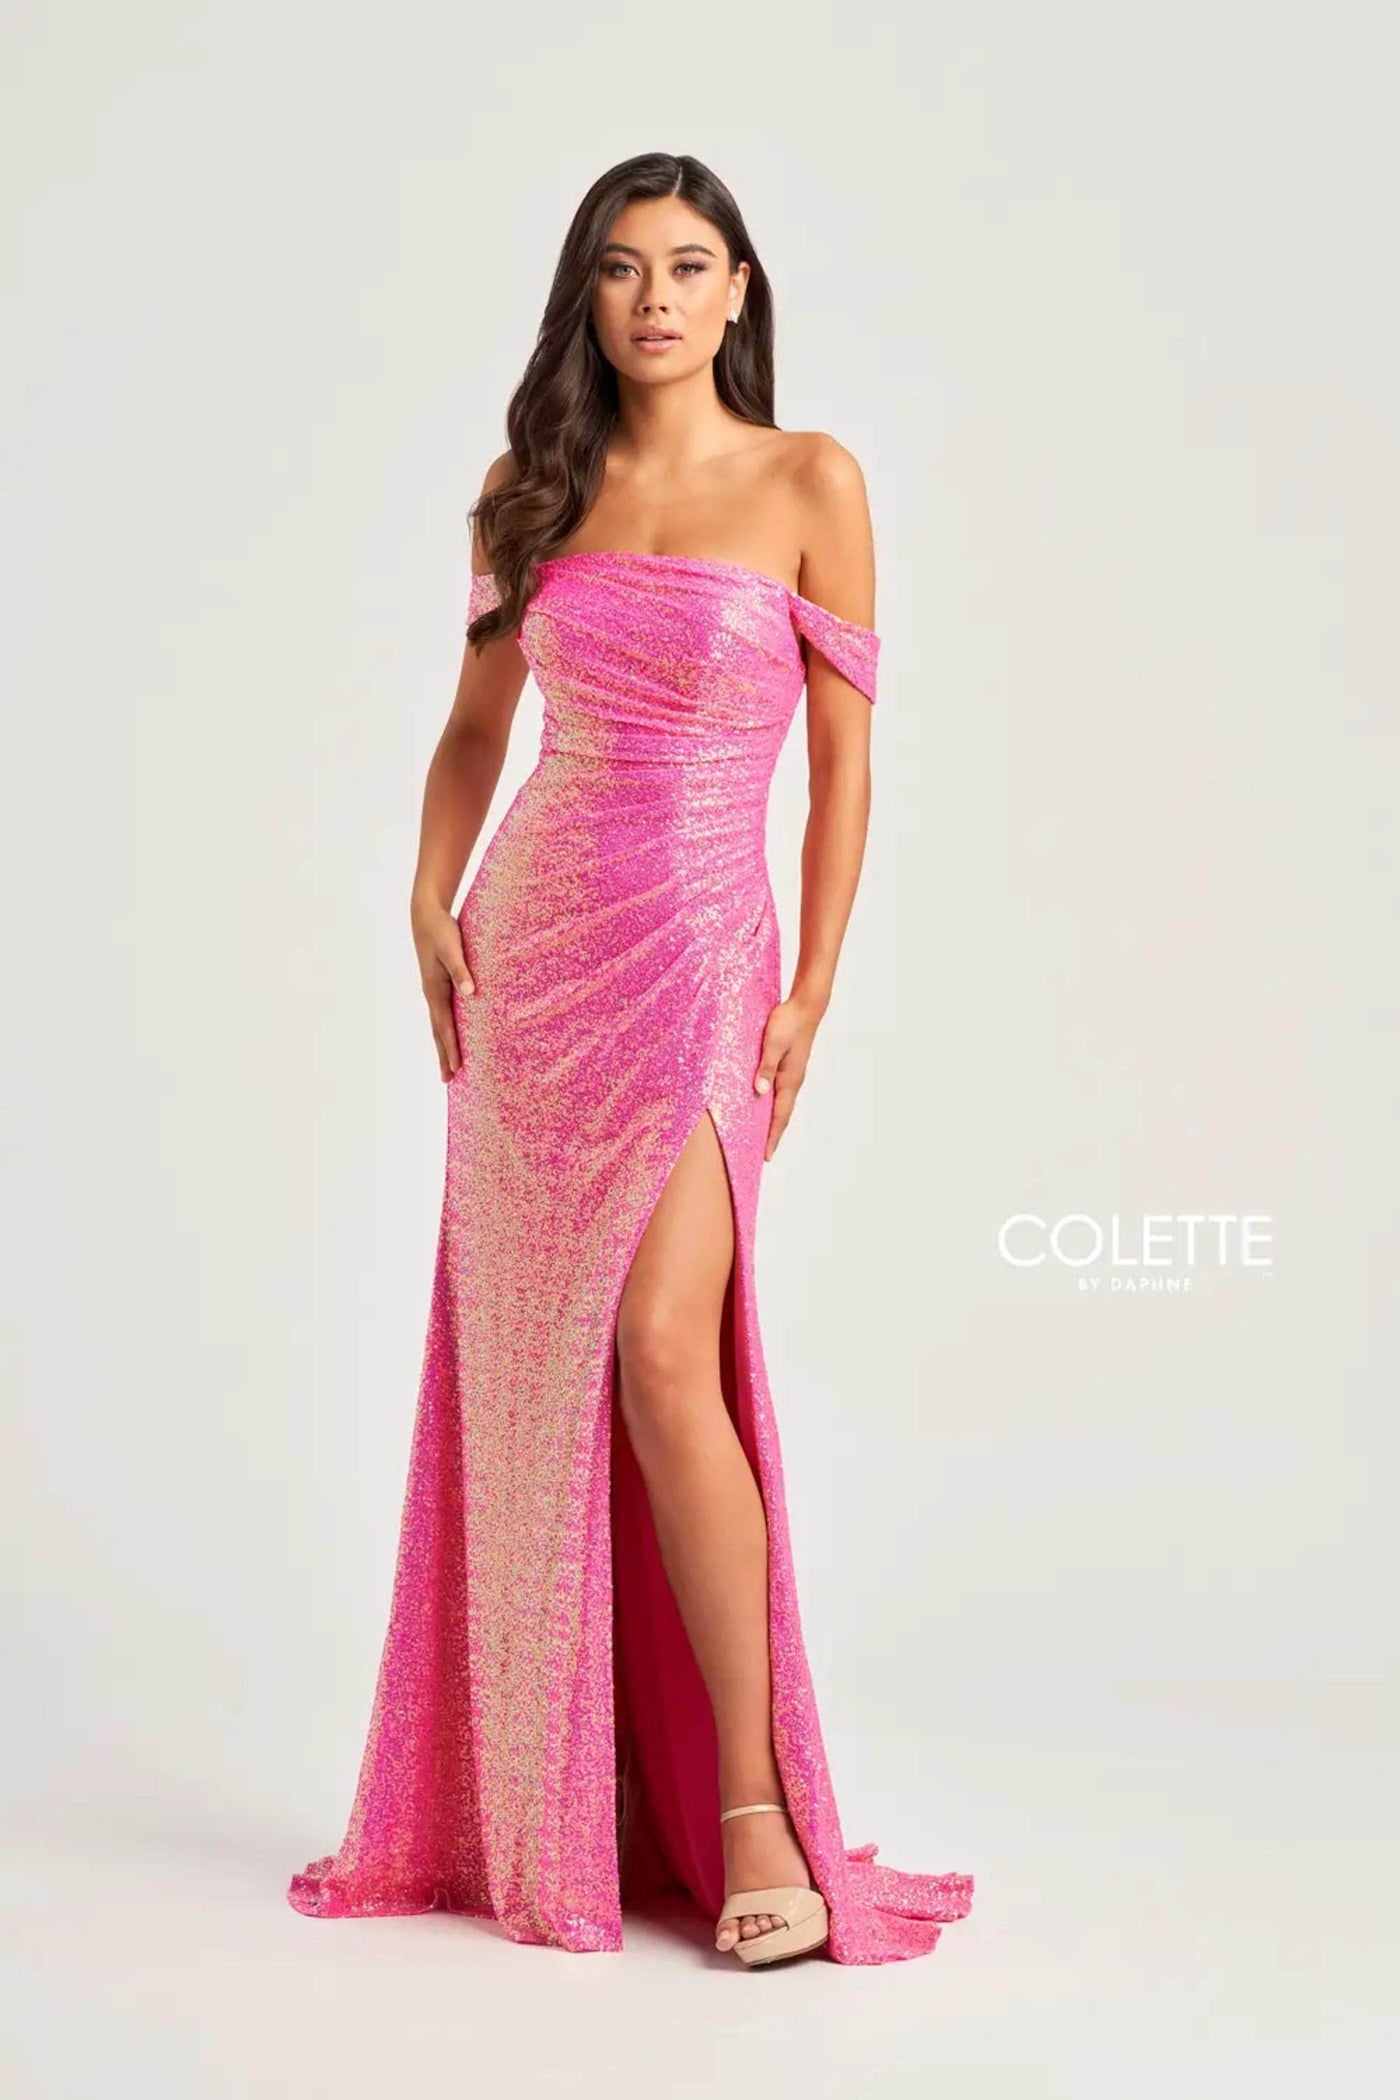 Colette By Daphne CL5129 - Ruched Sequin Prom Dress